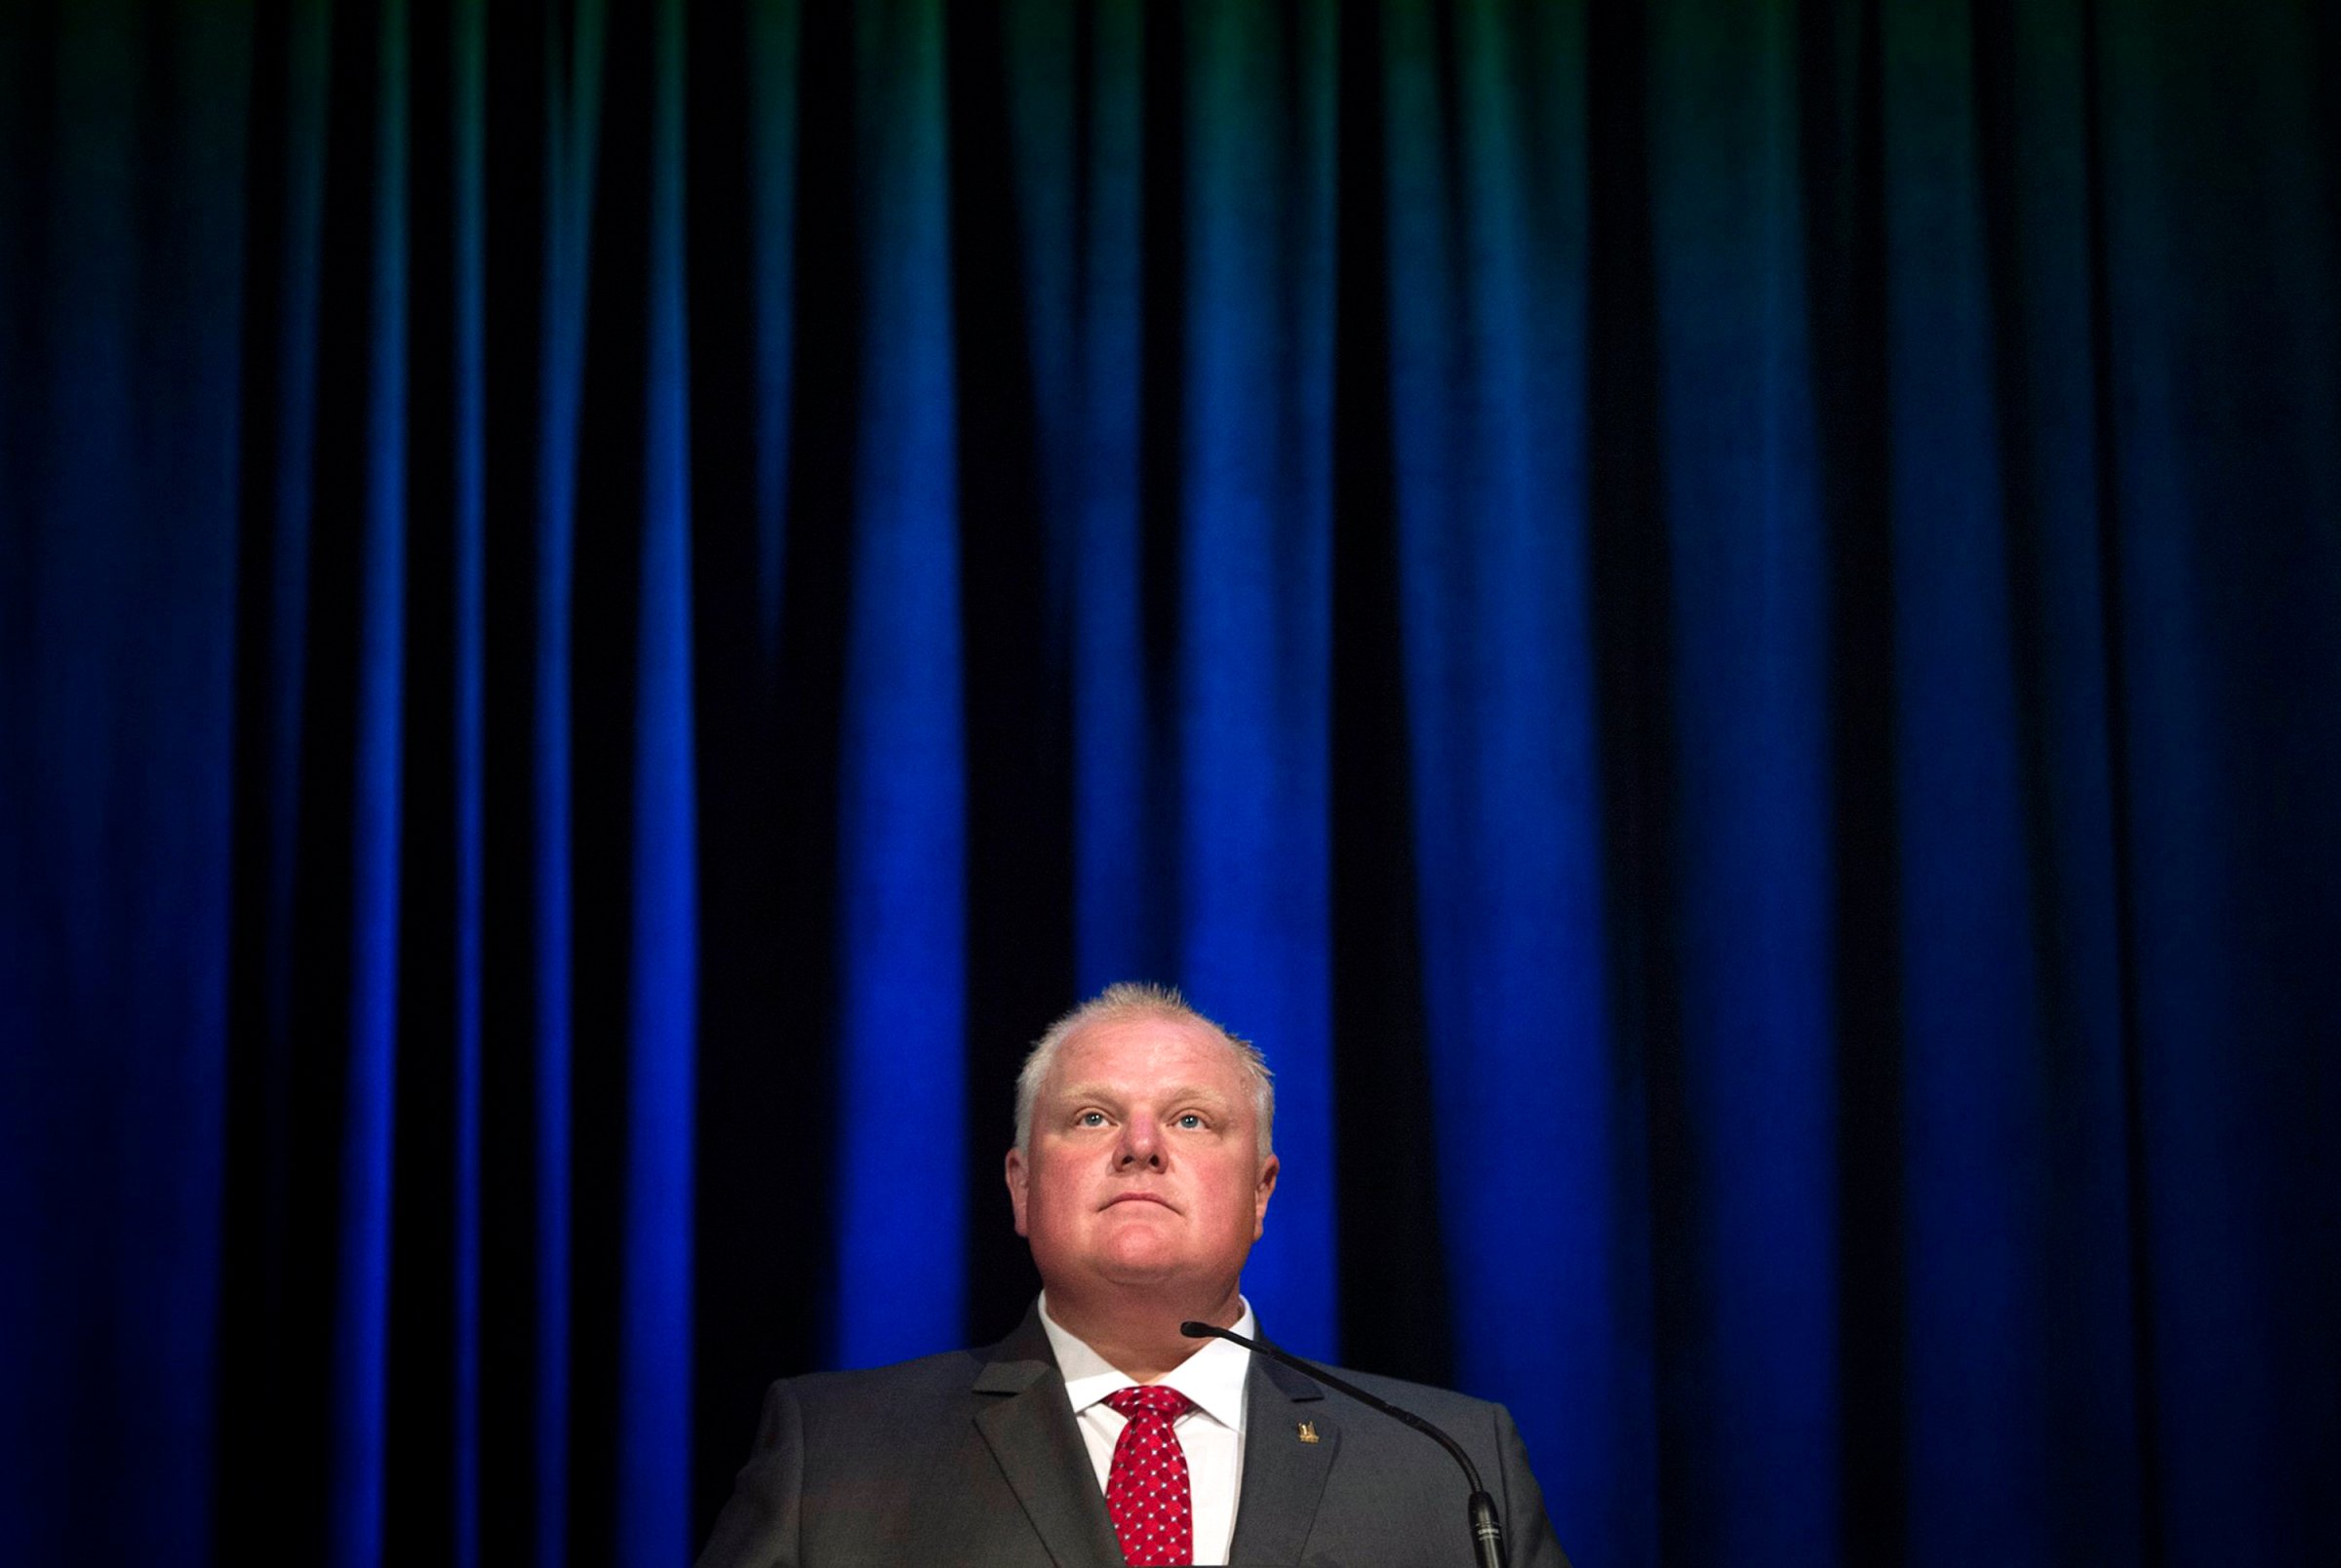 Toronto Mayor Rob Ford pauses while participating in a mayoral debate in Toronto on July 15, 2014.